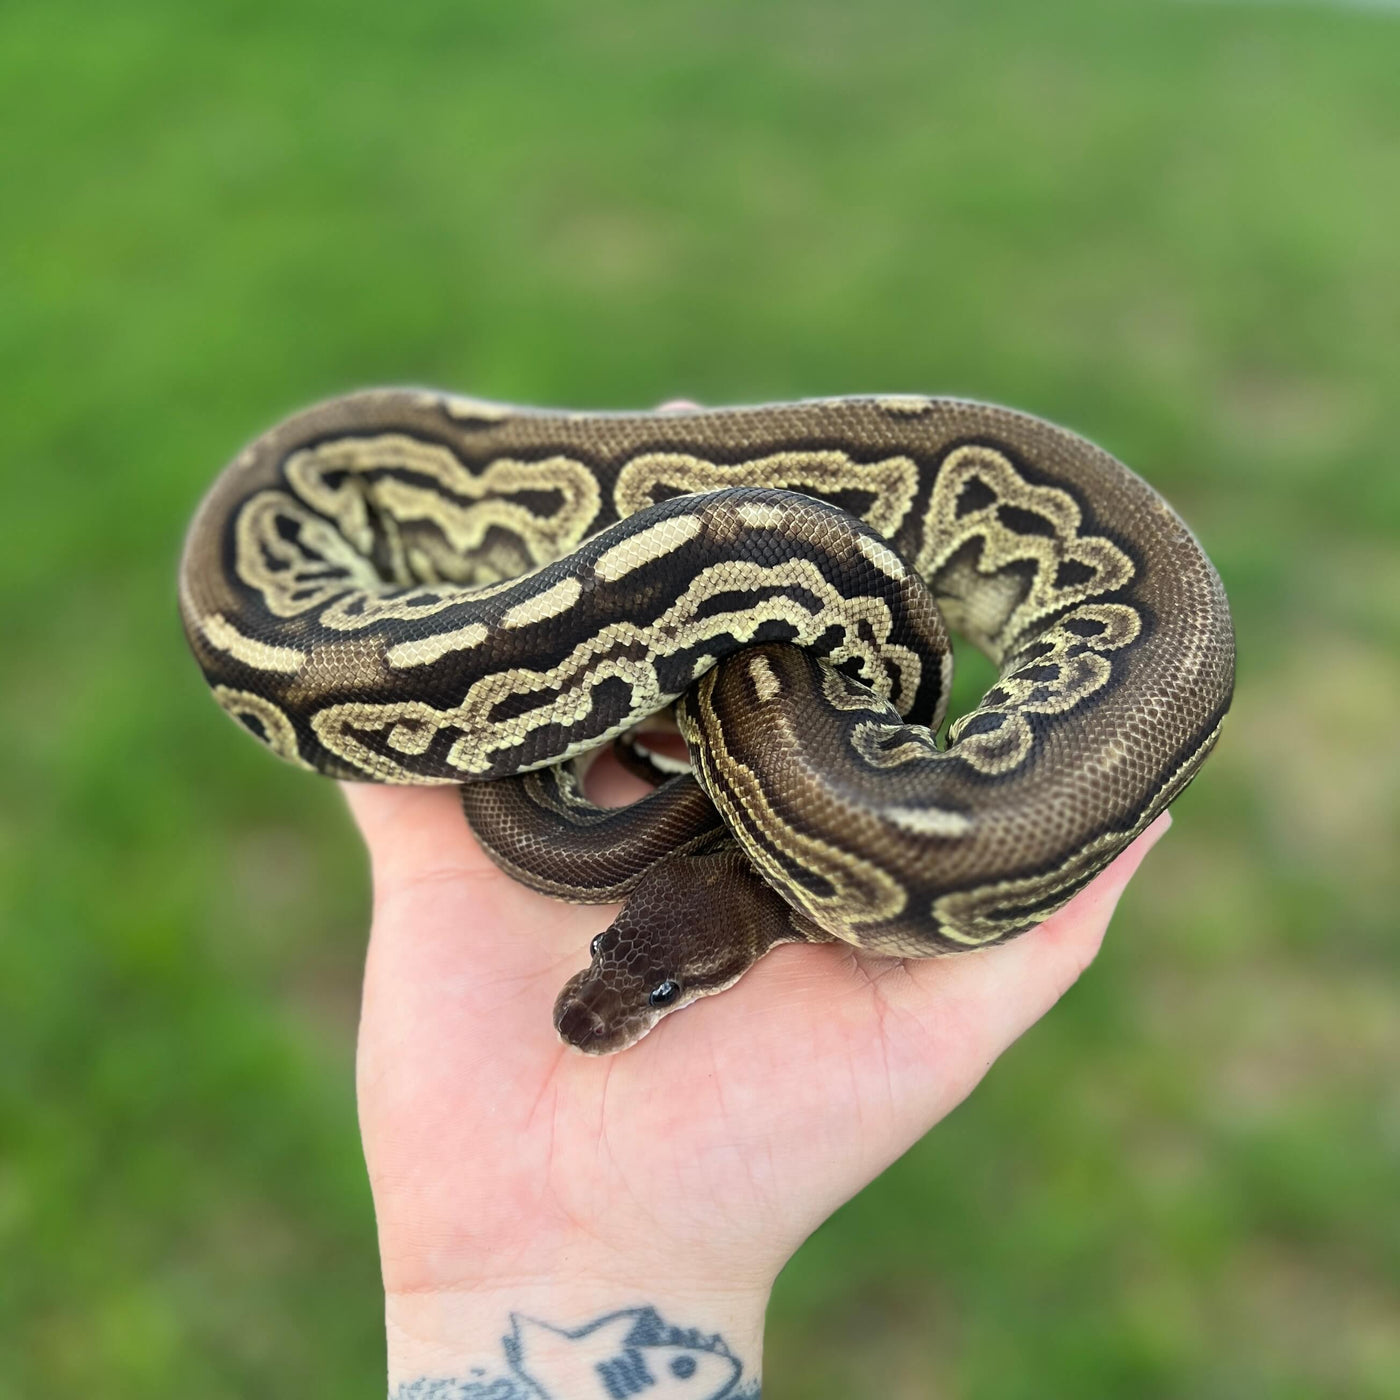 gargoyle ball python for sale online, buy super fire ball pythons at cheap prices.